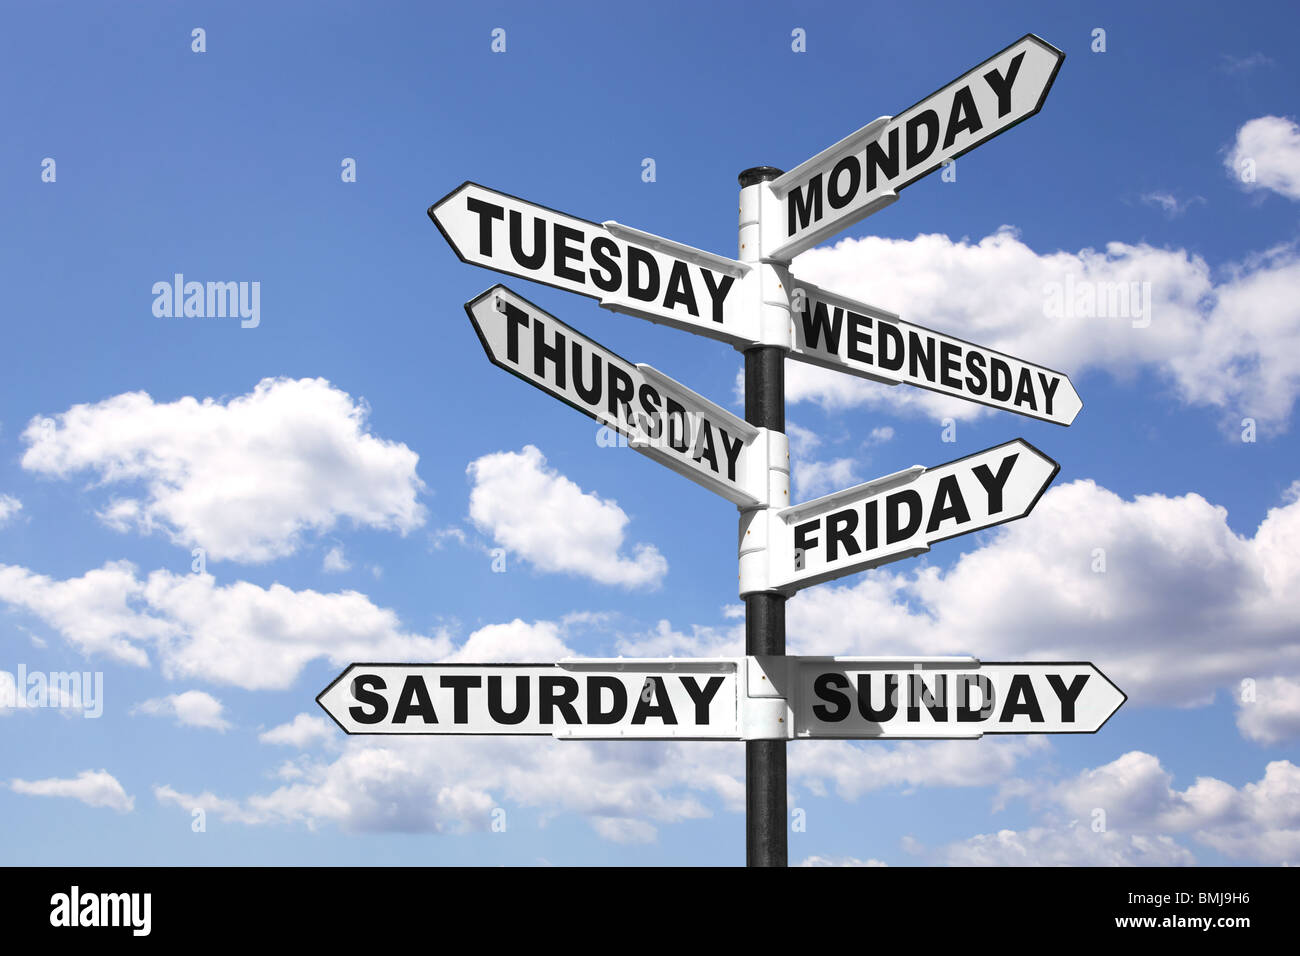 Signpost showing the seven days of the week Stock Photo